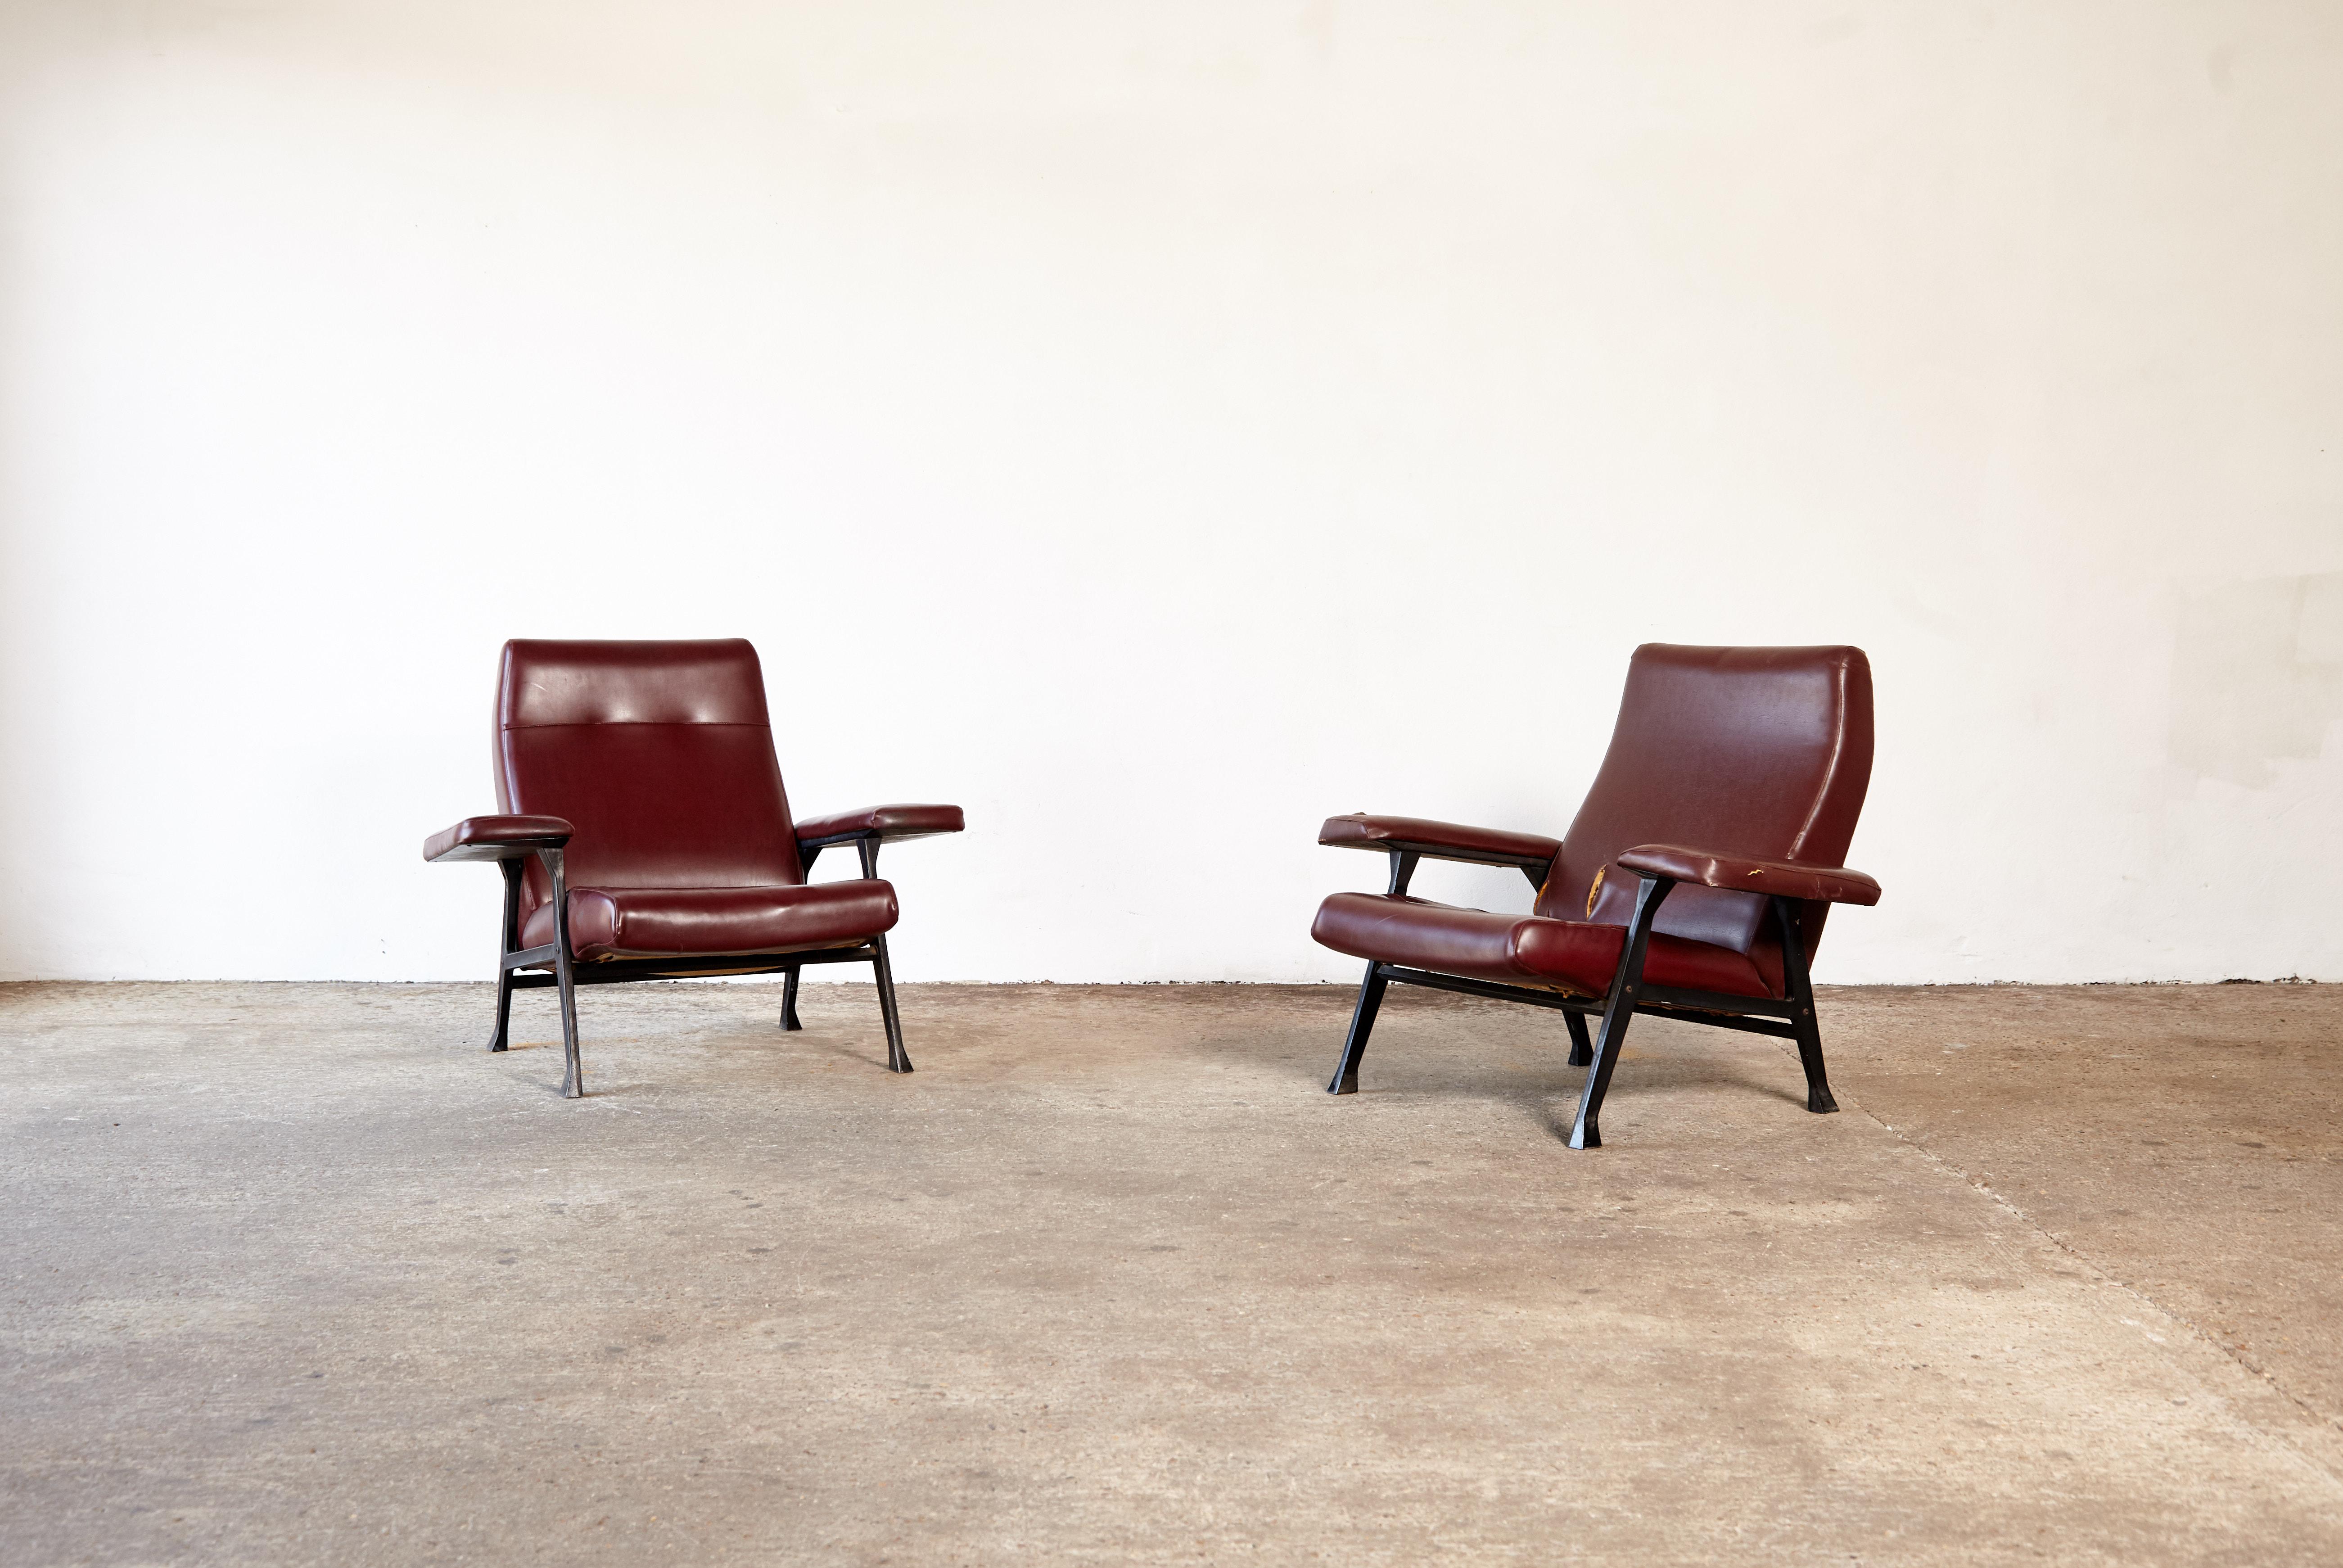 An original and rare early pair of Roberto Menghi Hall Chairs, produced by Arflex, Italy, 1950s. These chairs were specified by Gio Ponti for his Iconic Pirelli Tower in Milan. They were awarded the Prestigious Prize the Compasso d’Oro in